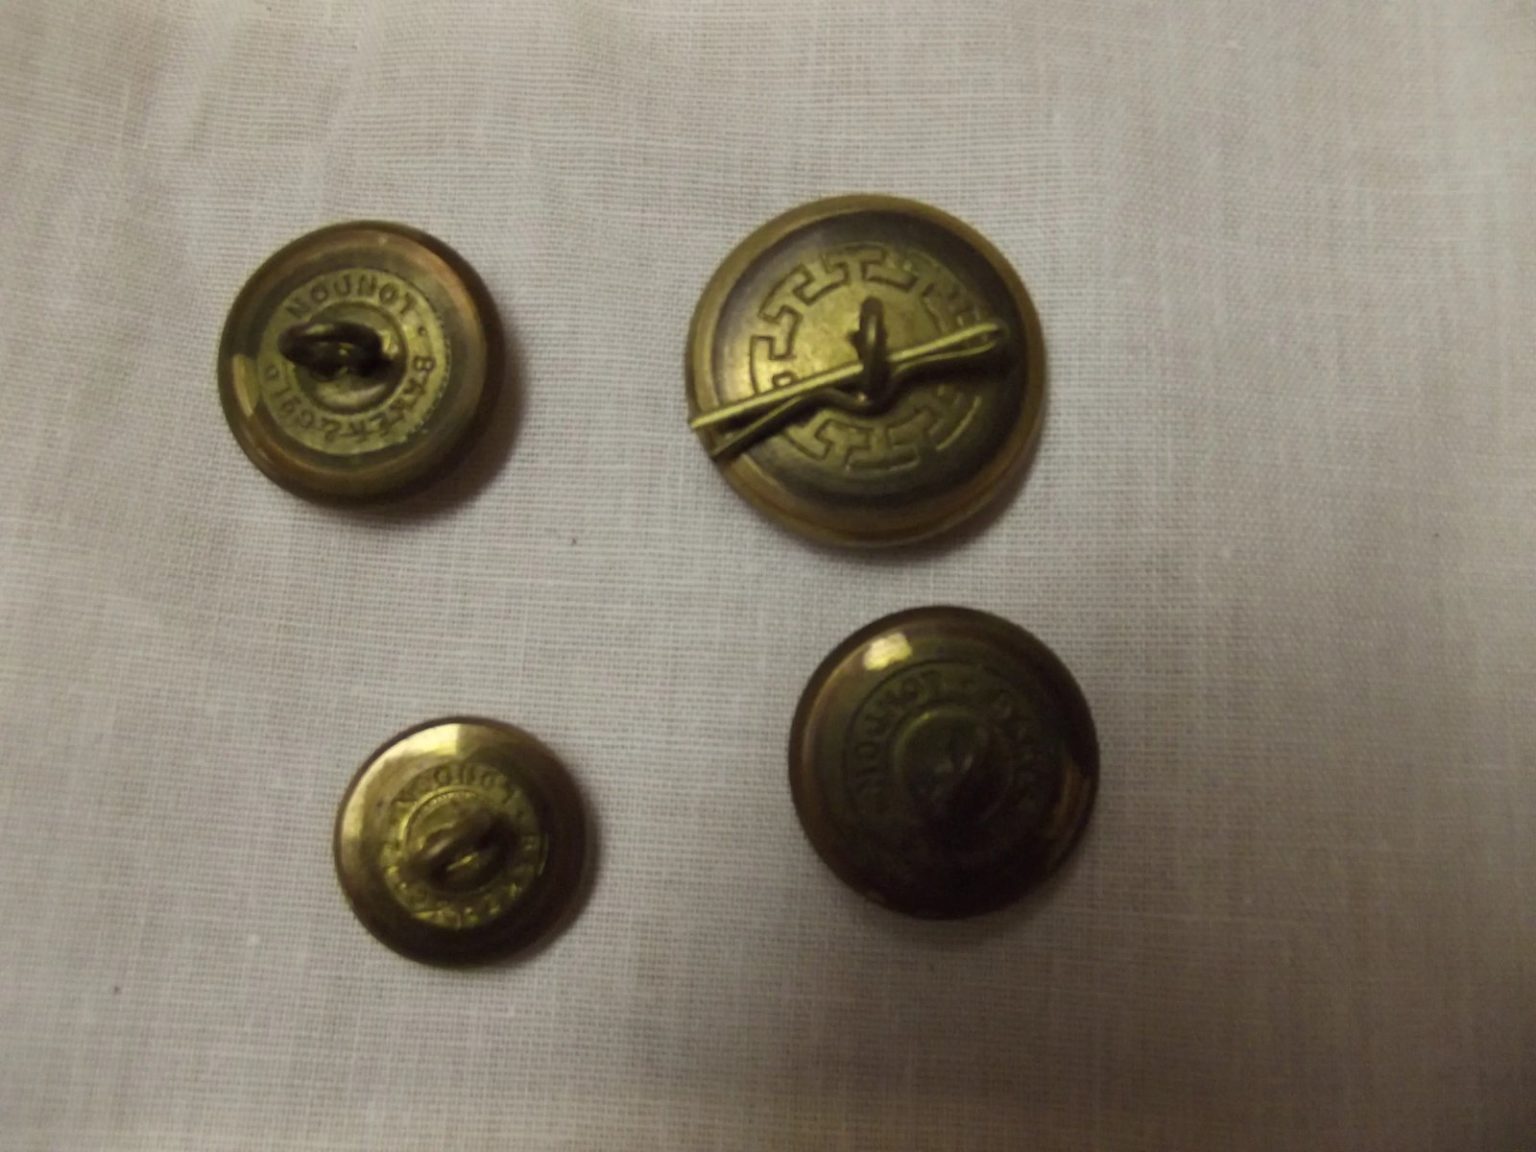 White Star Line Officers Cap Badge & 4 Buttons - Sally Antiques